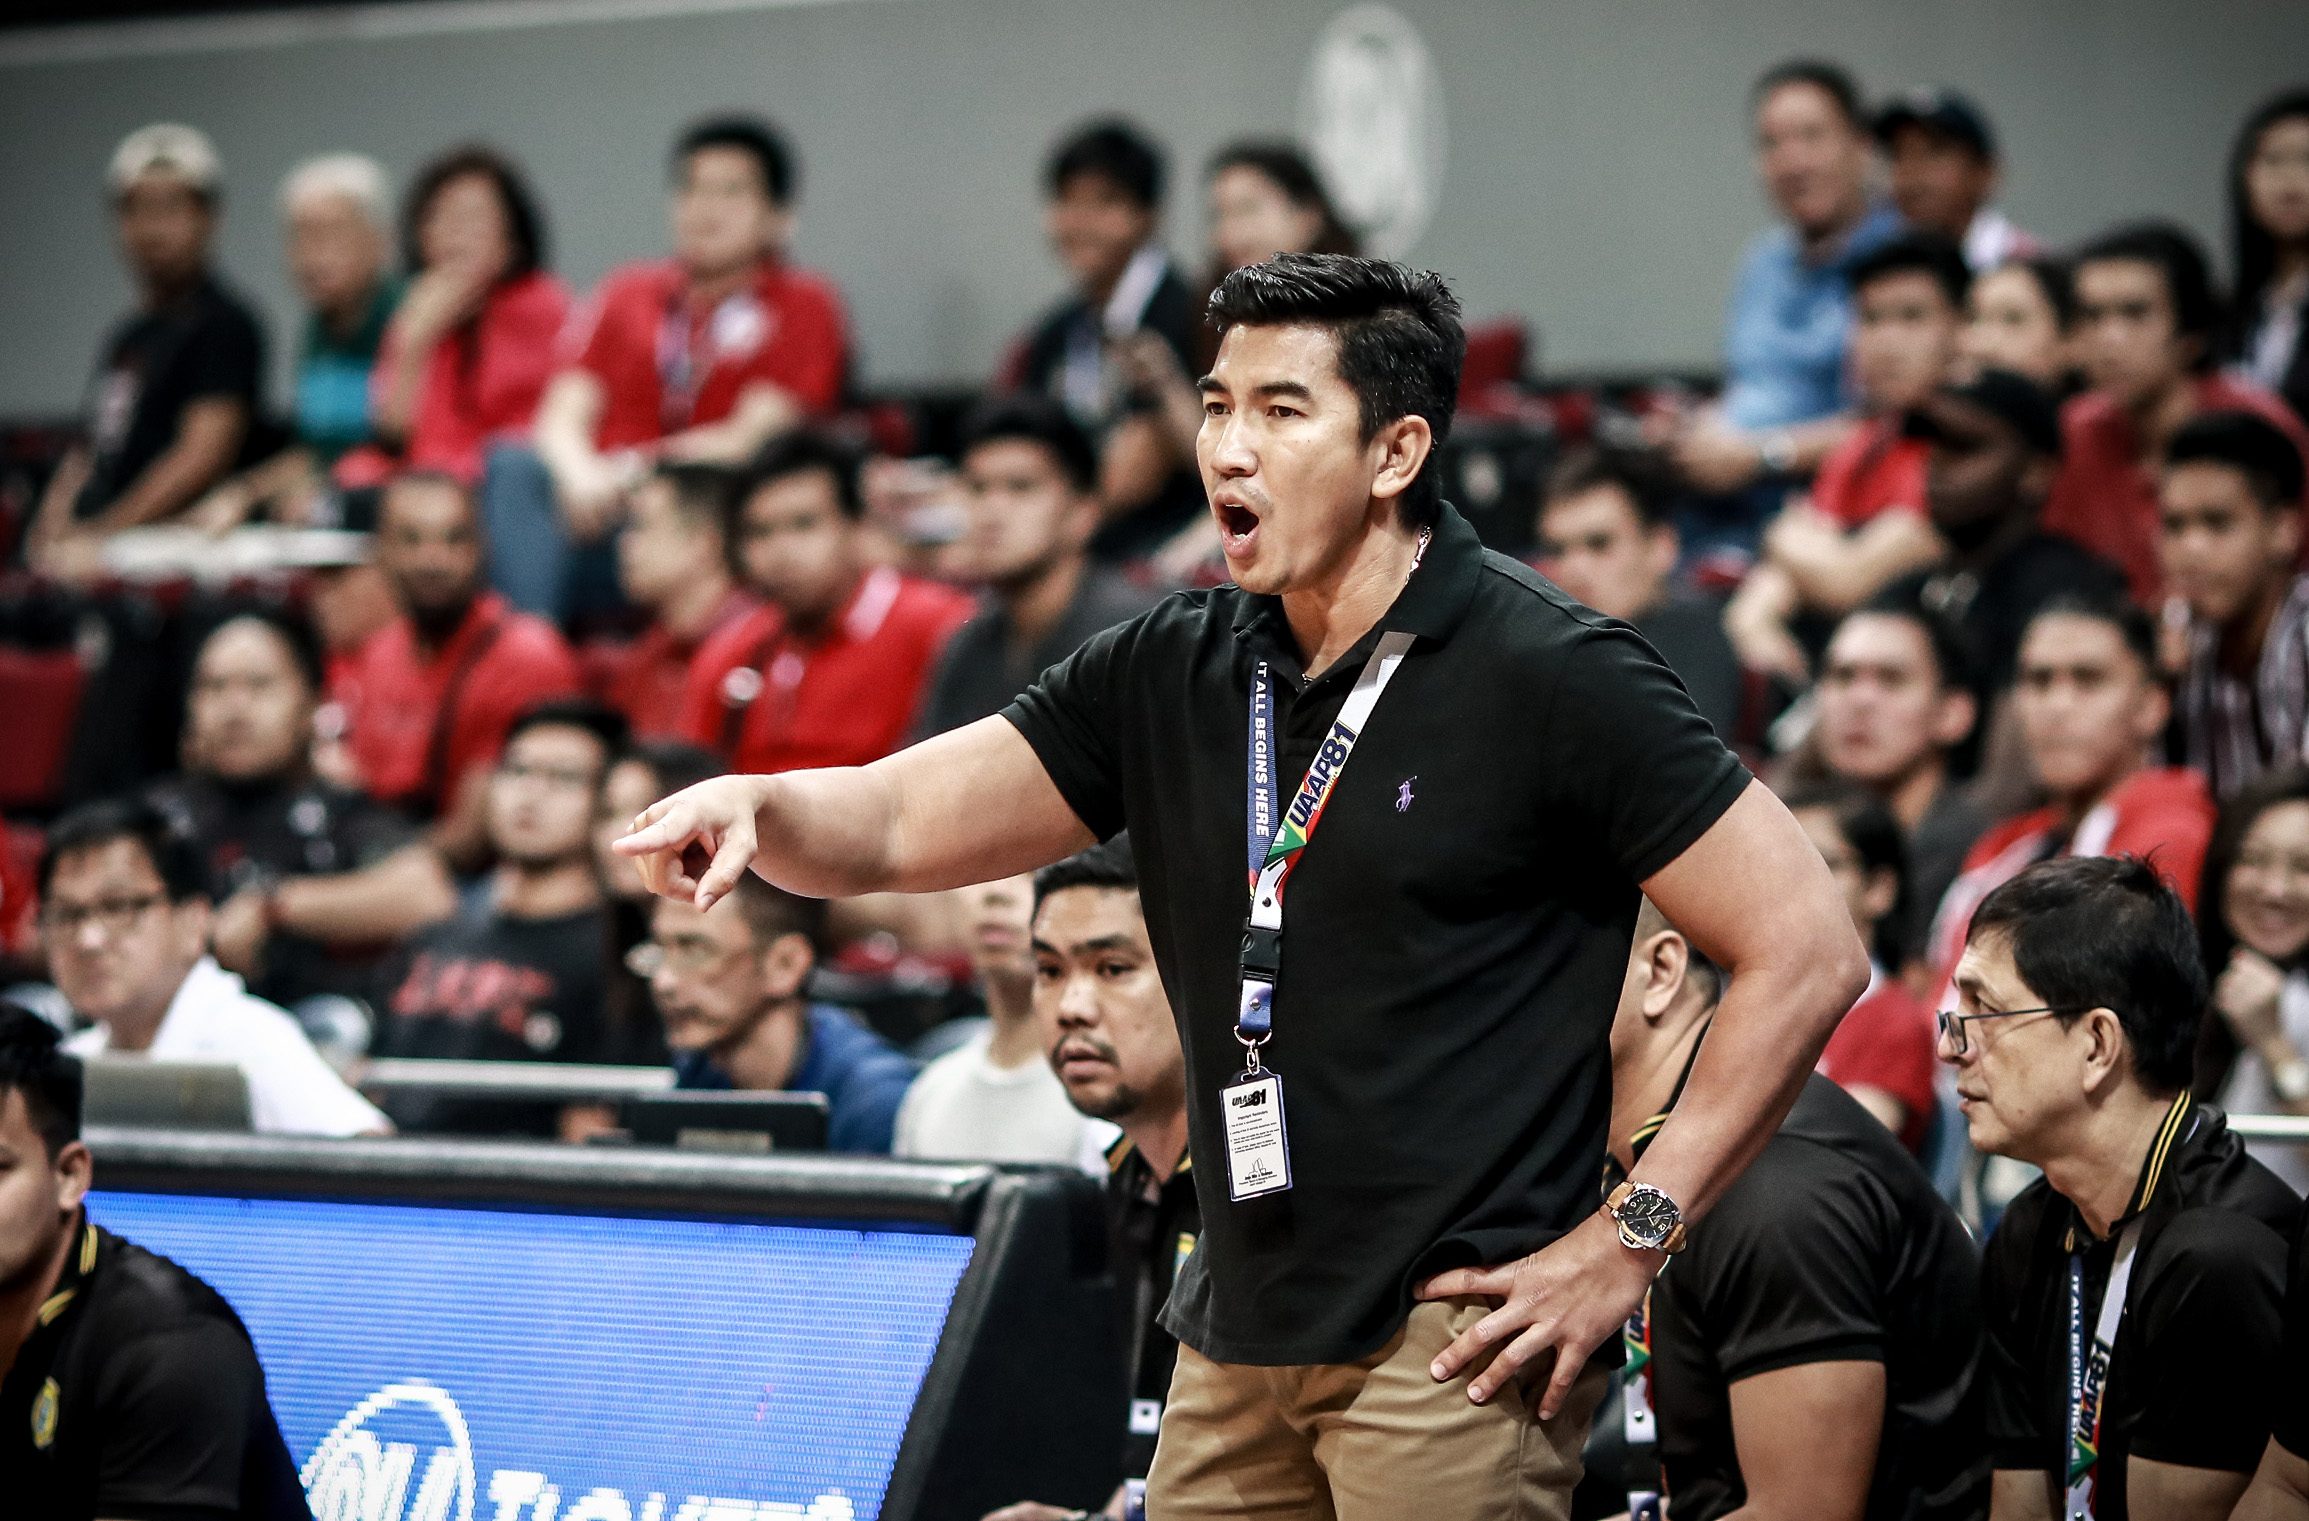 Converge core players vouch for Ayo’s coaching caliber ahead of PBA debut